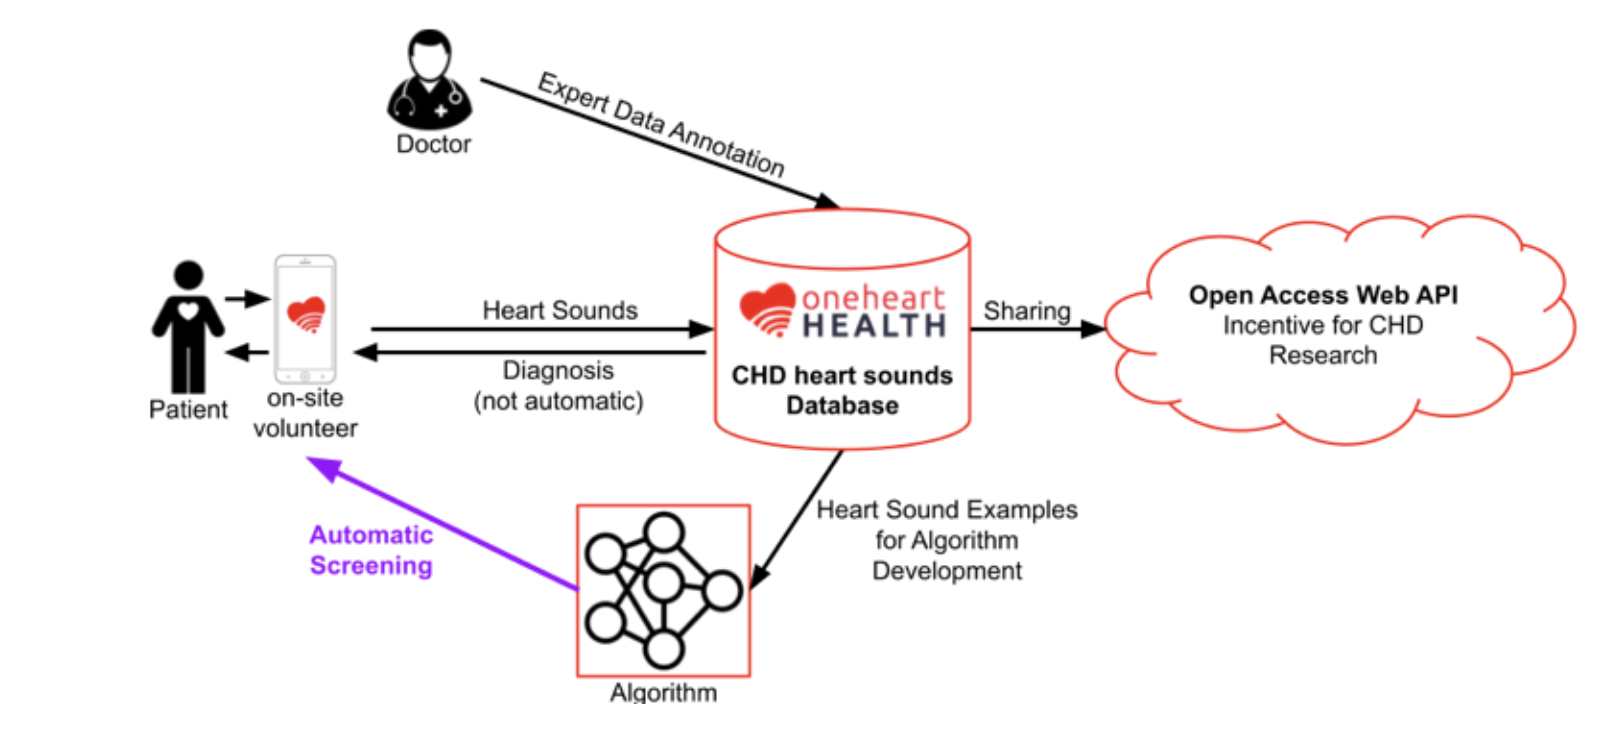 Technology workflow behind the One Heart app’s automatic screening function